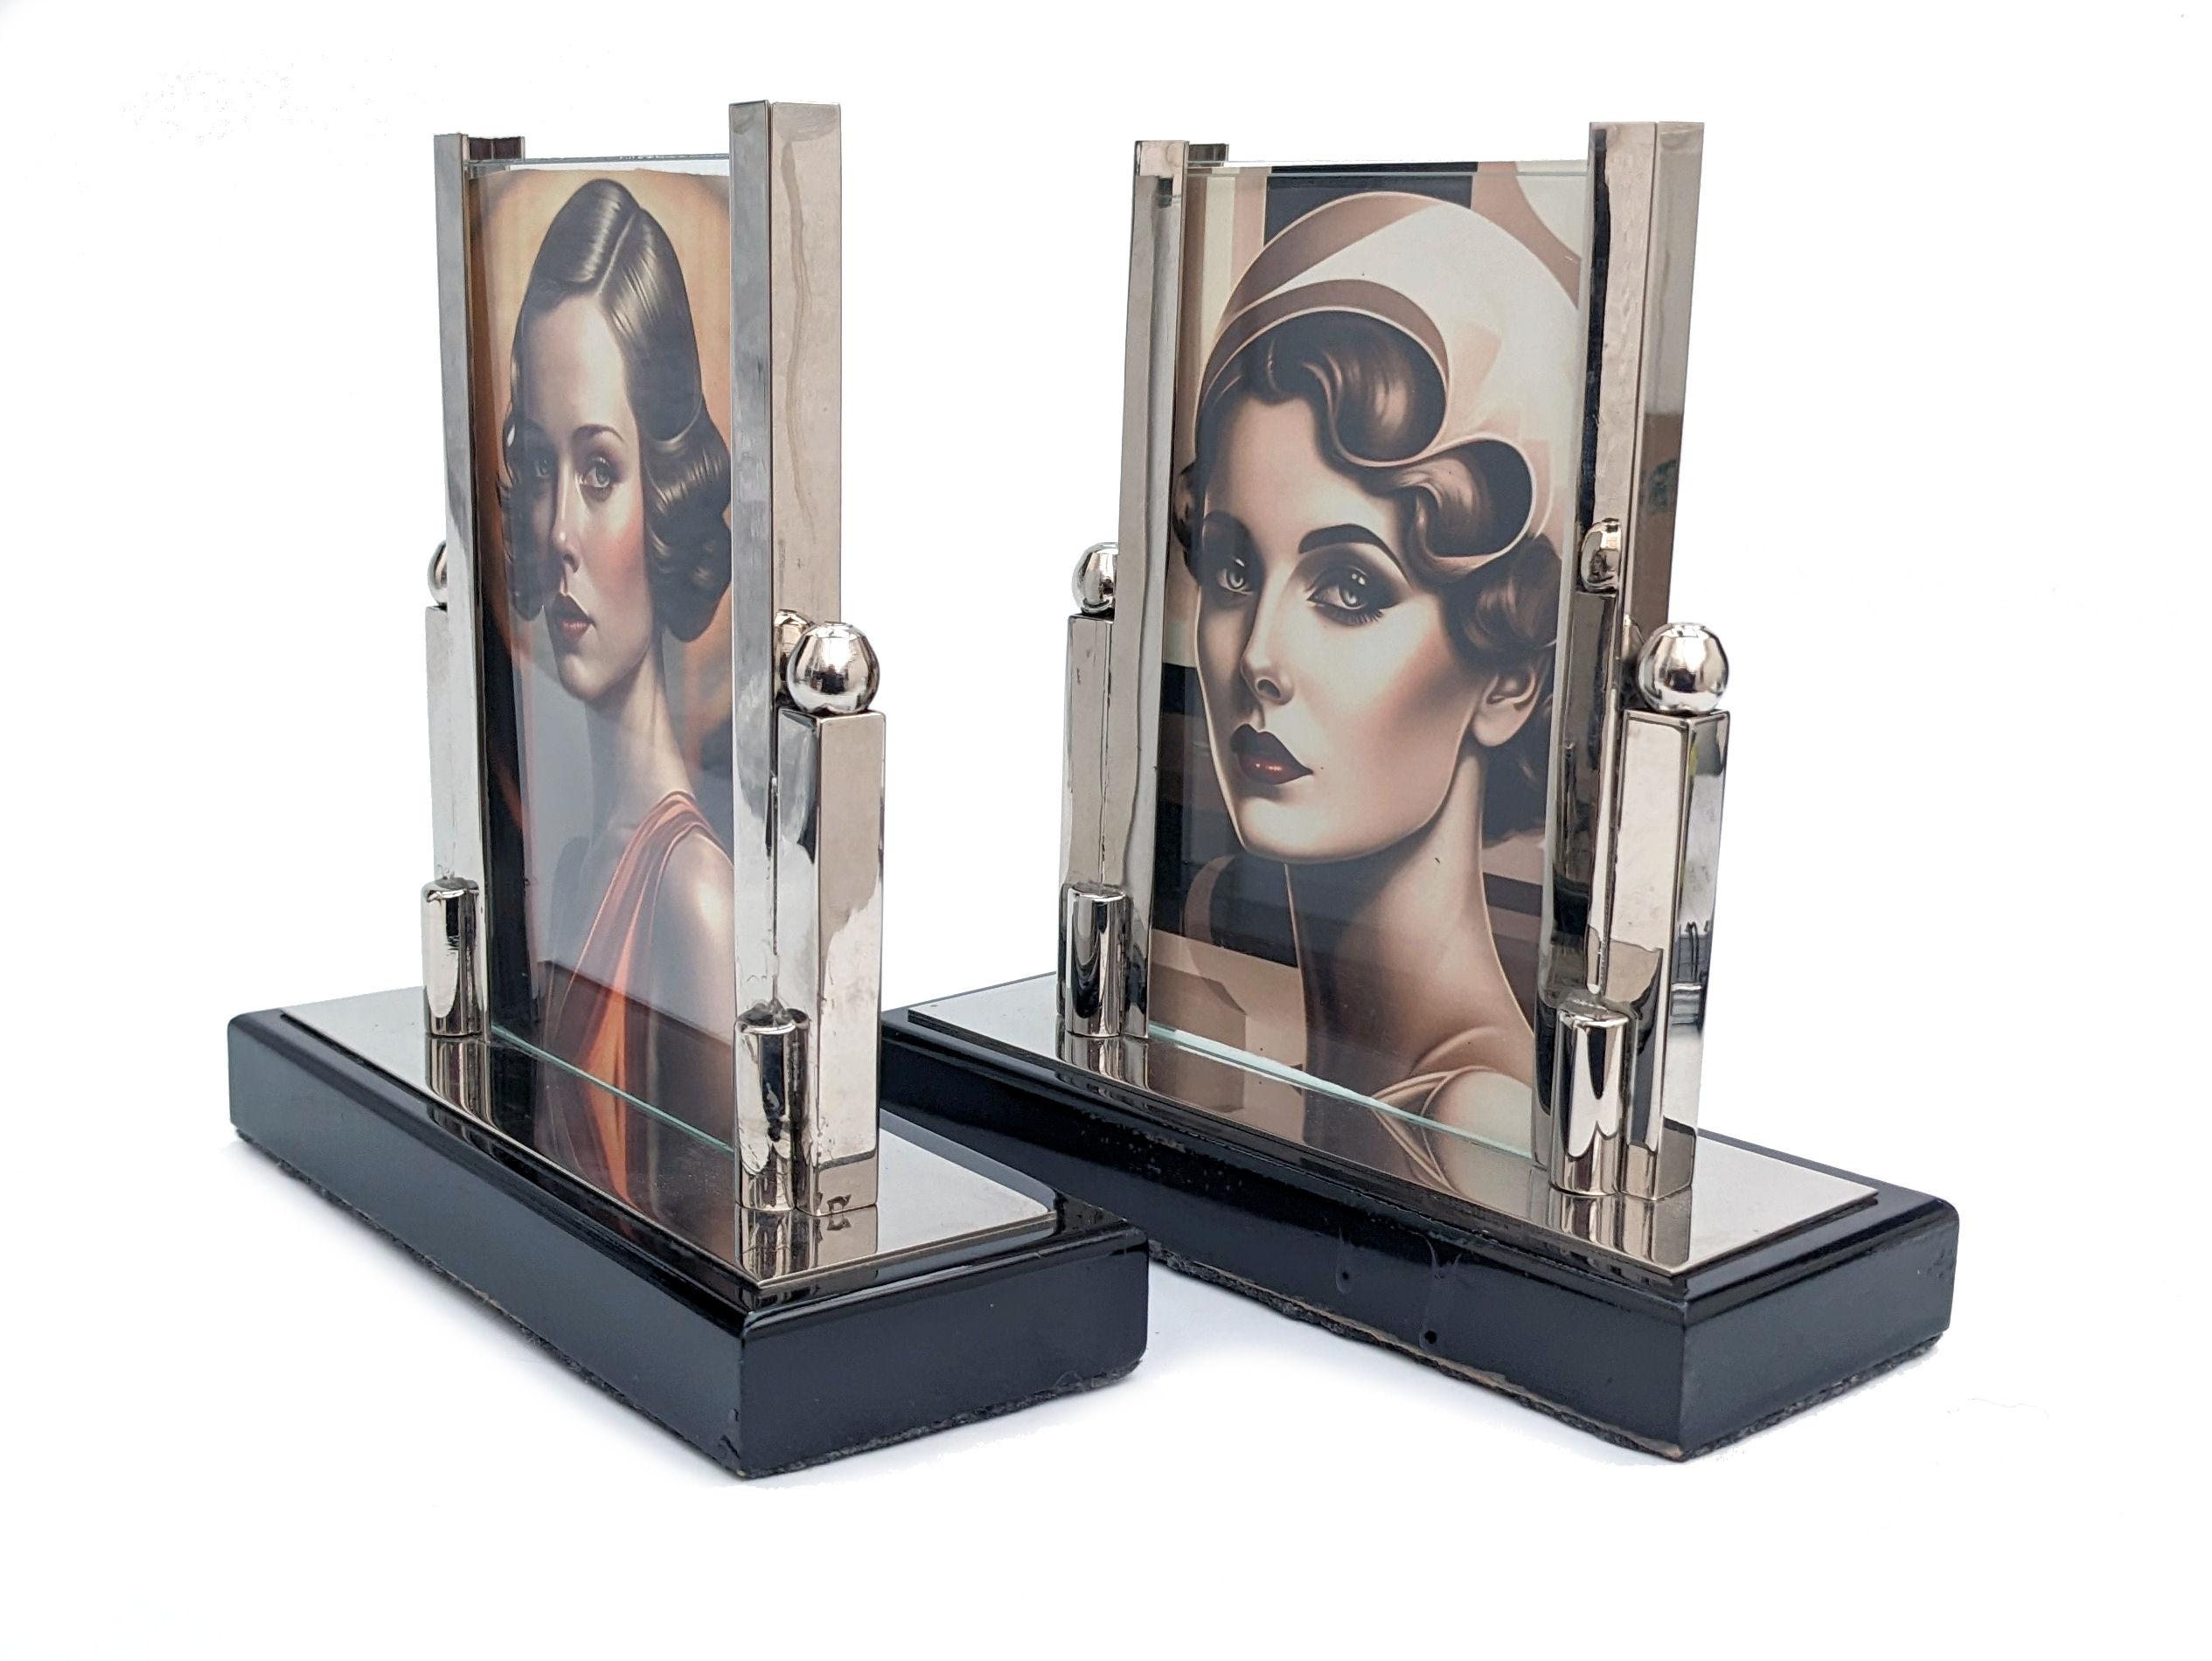 Superb 1930's Art Deco modernist free standing picture frames in chrome and glass. The frame has two pieces of glass which slot into the chrome stand. You can display a picture both to the front and back. Highly lacquered black wooden base with